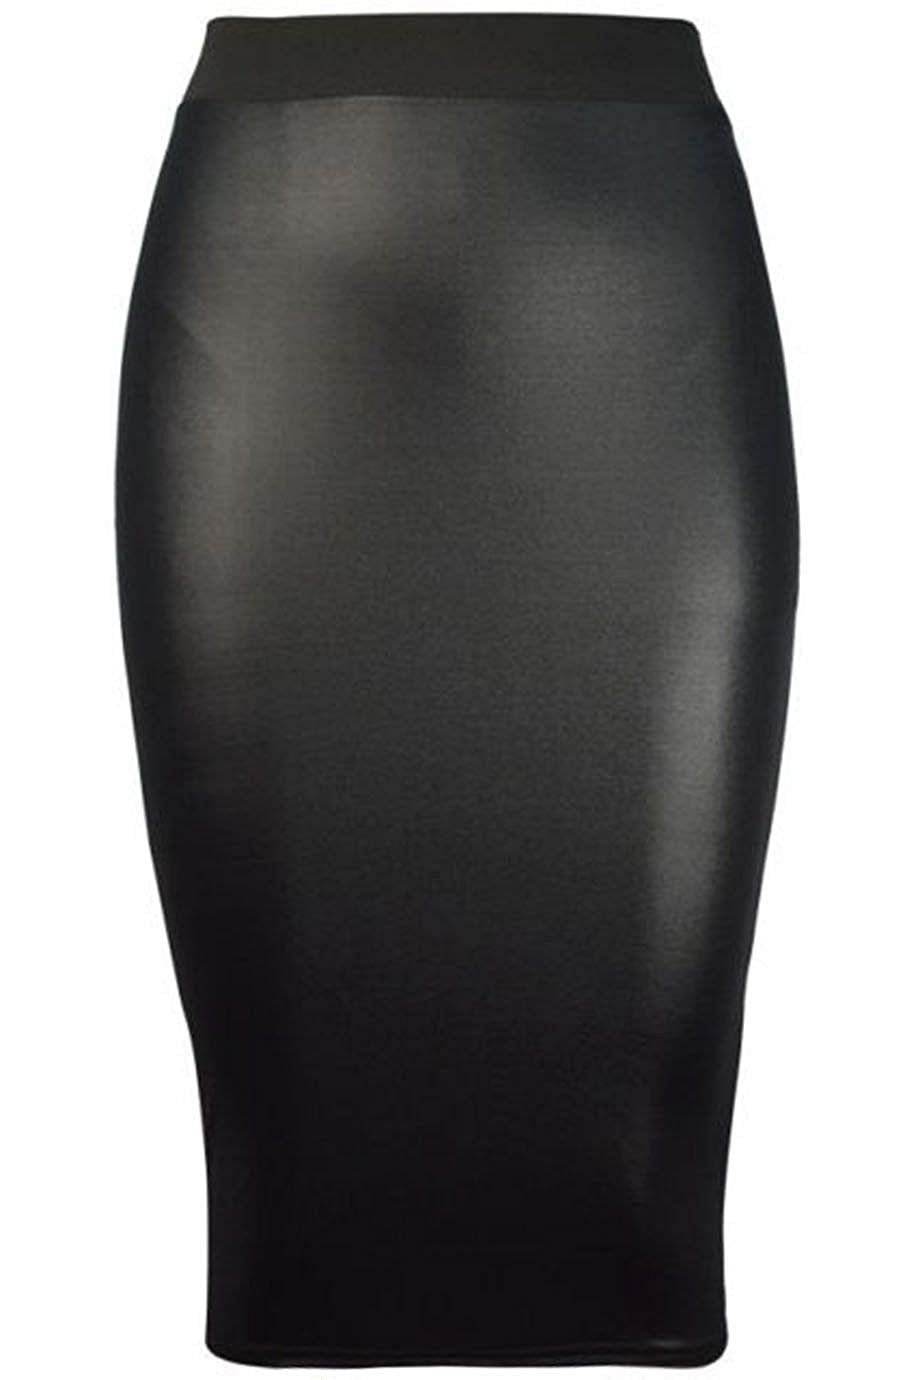 Fashion Womens Celebrity Inspired High Waisted Wetlook Bodycon Pencil Skirt